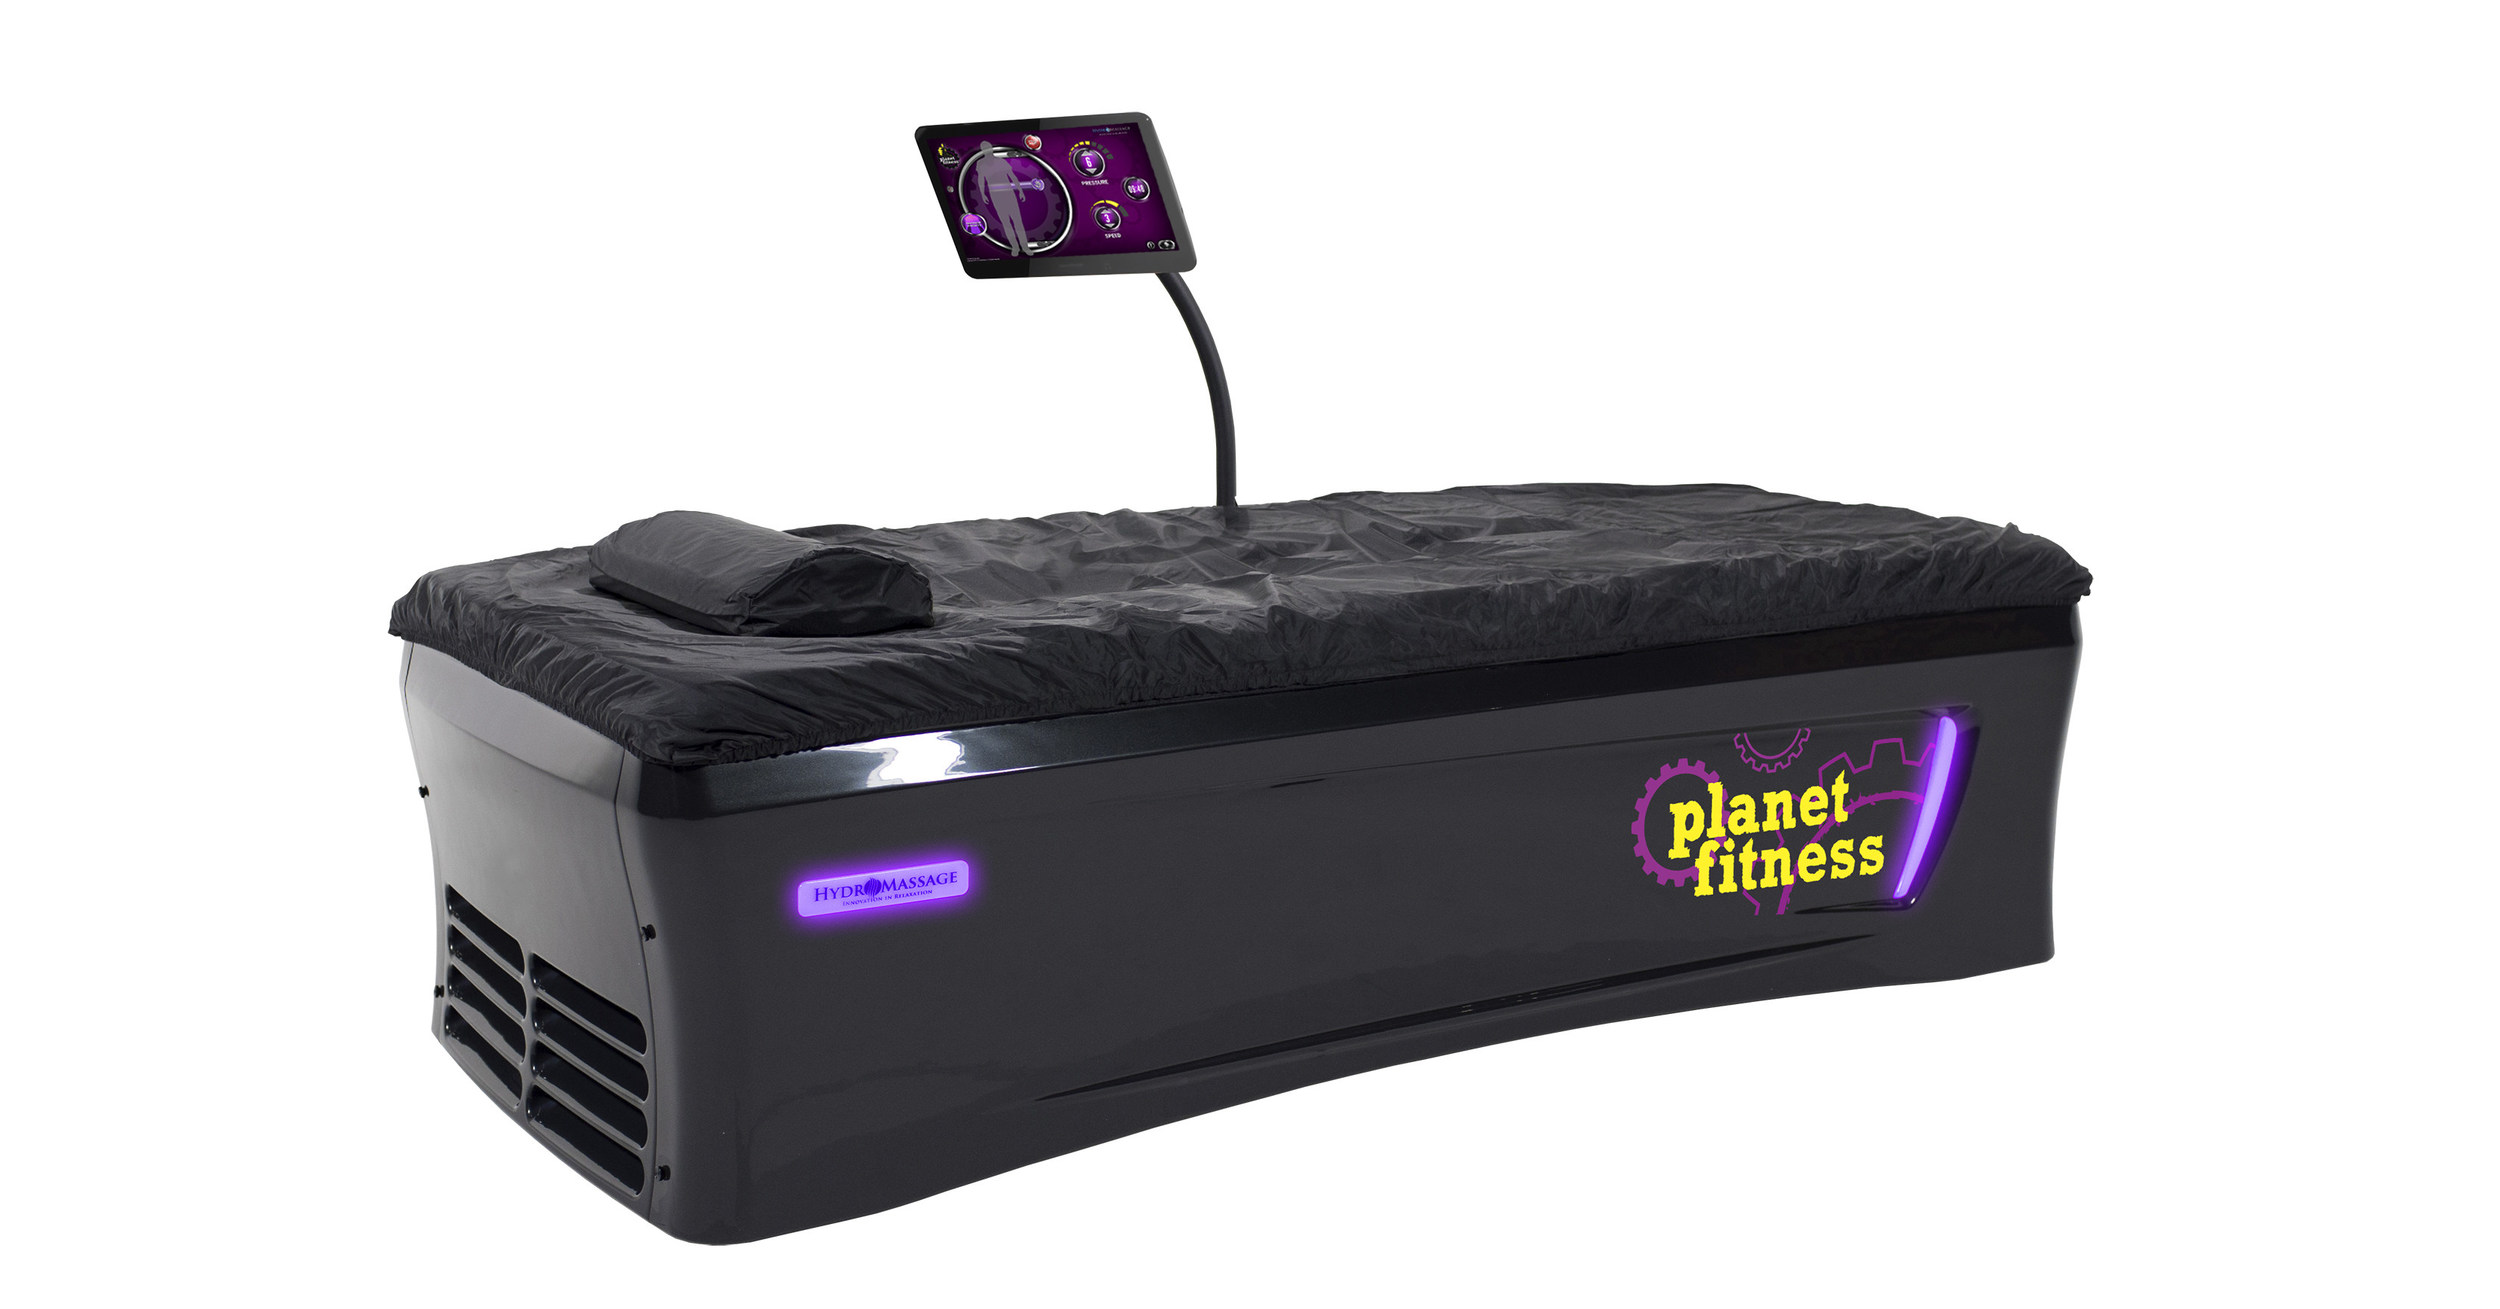 hydromassage bed planet fitness cost